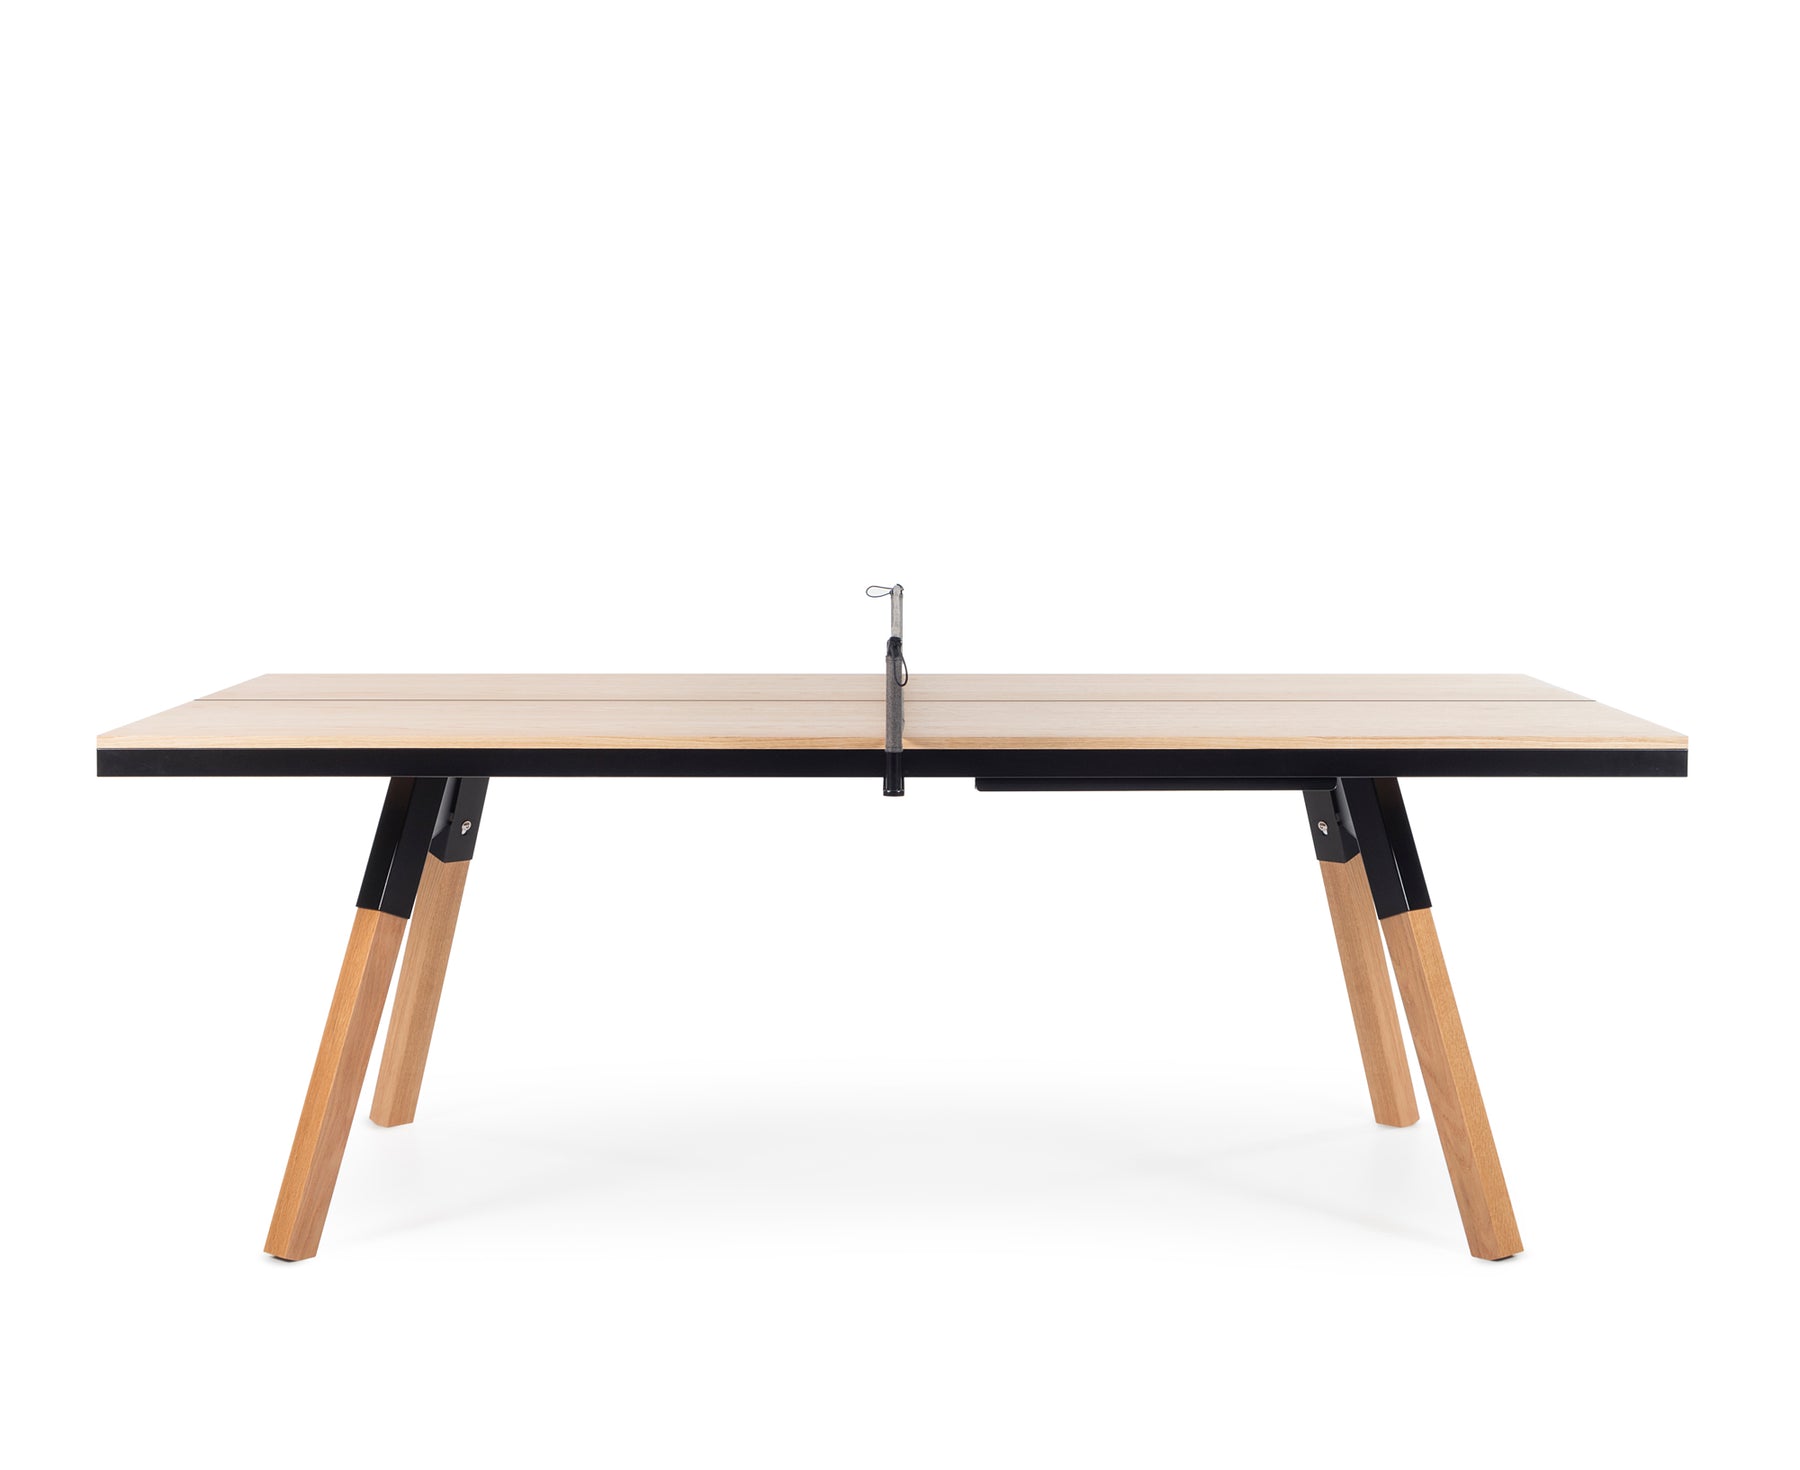 You And Me Ping Pong Table - Oak | DSHOP